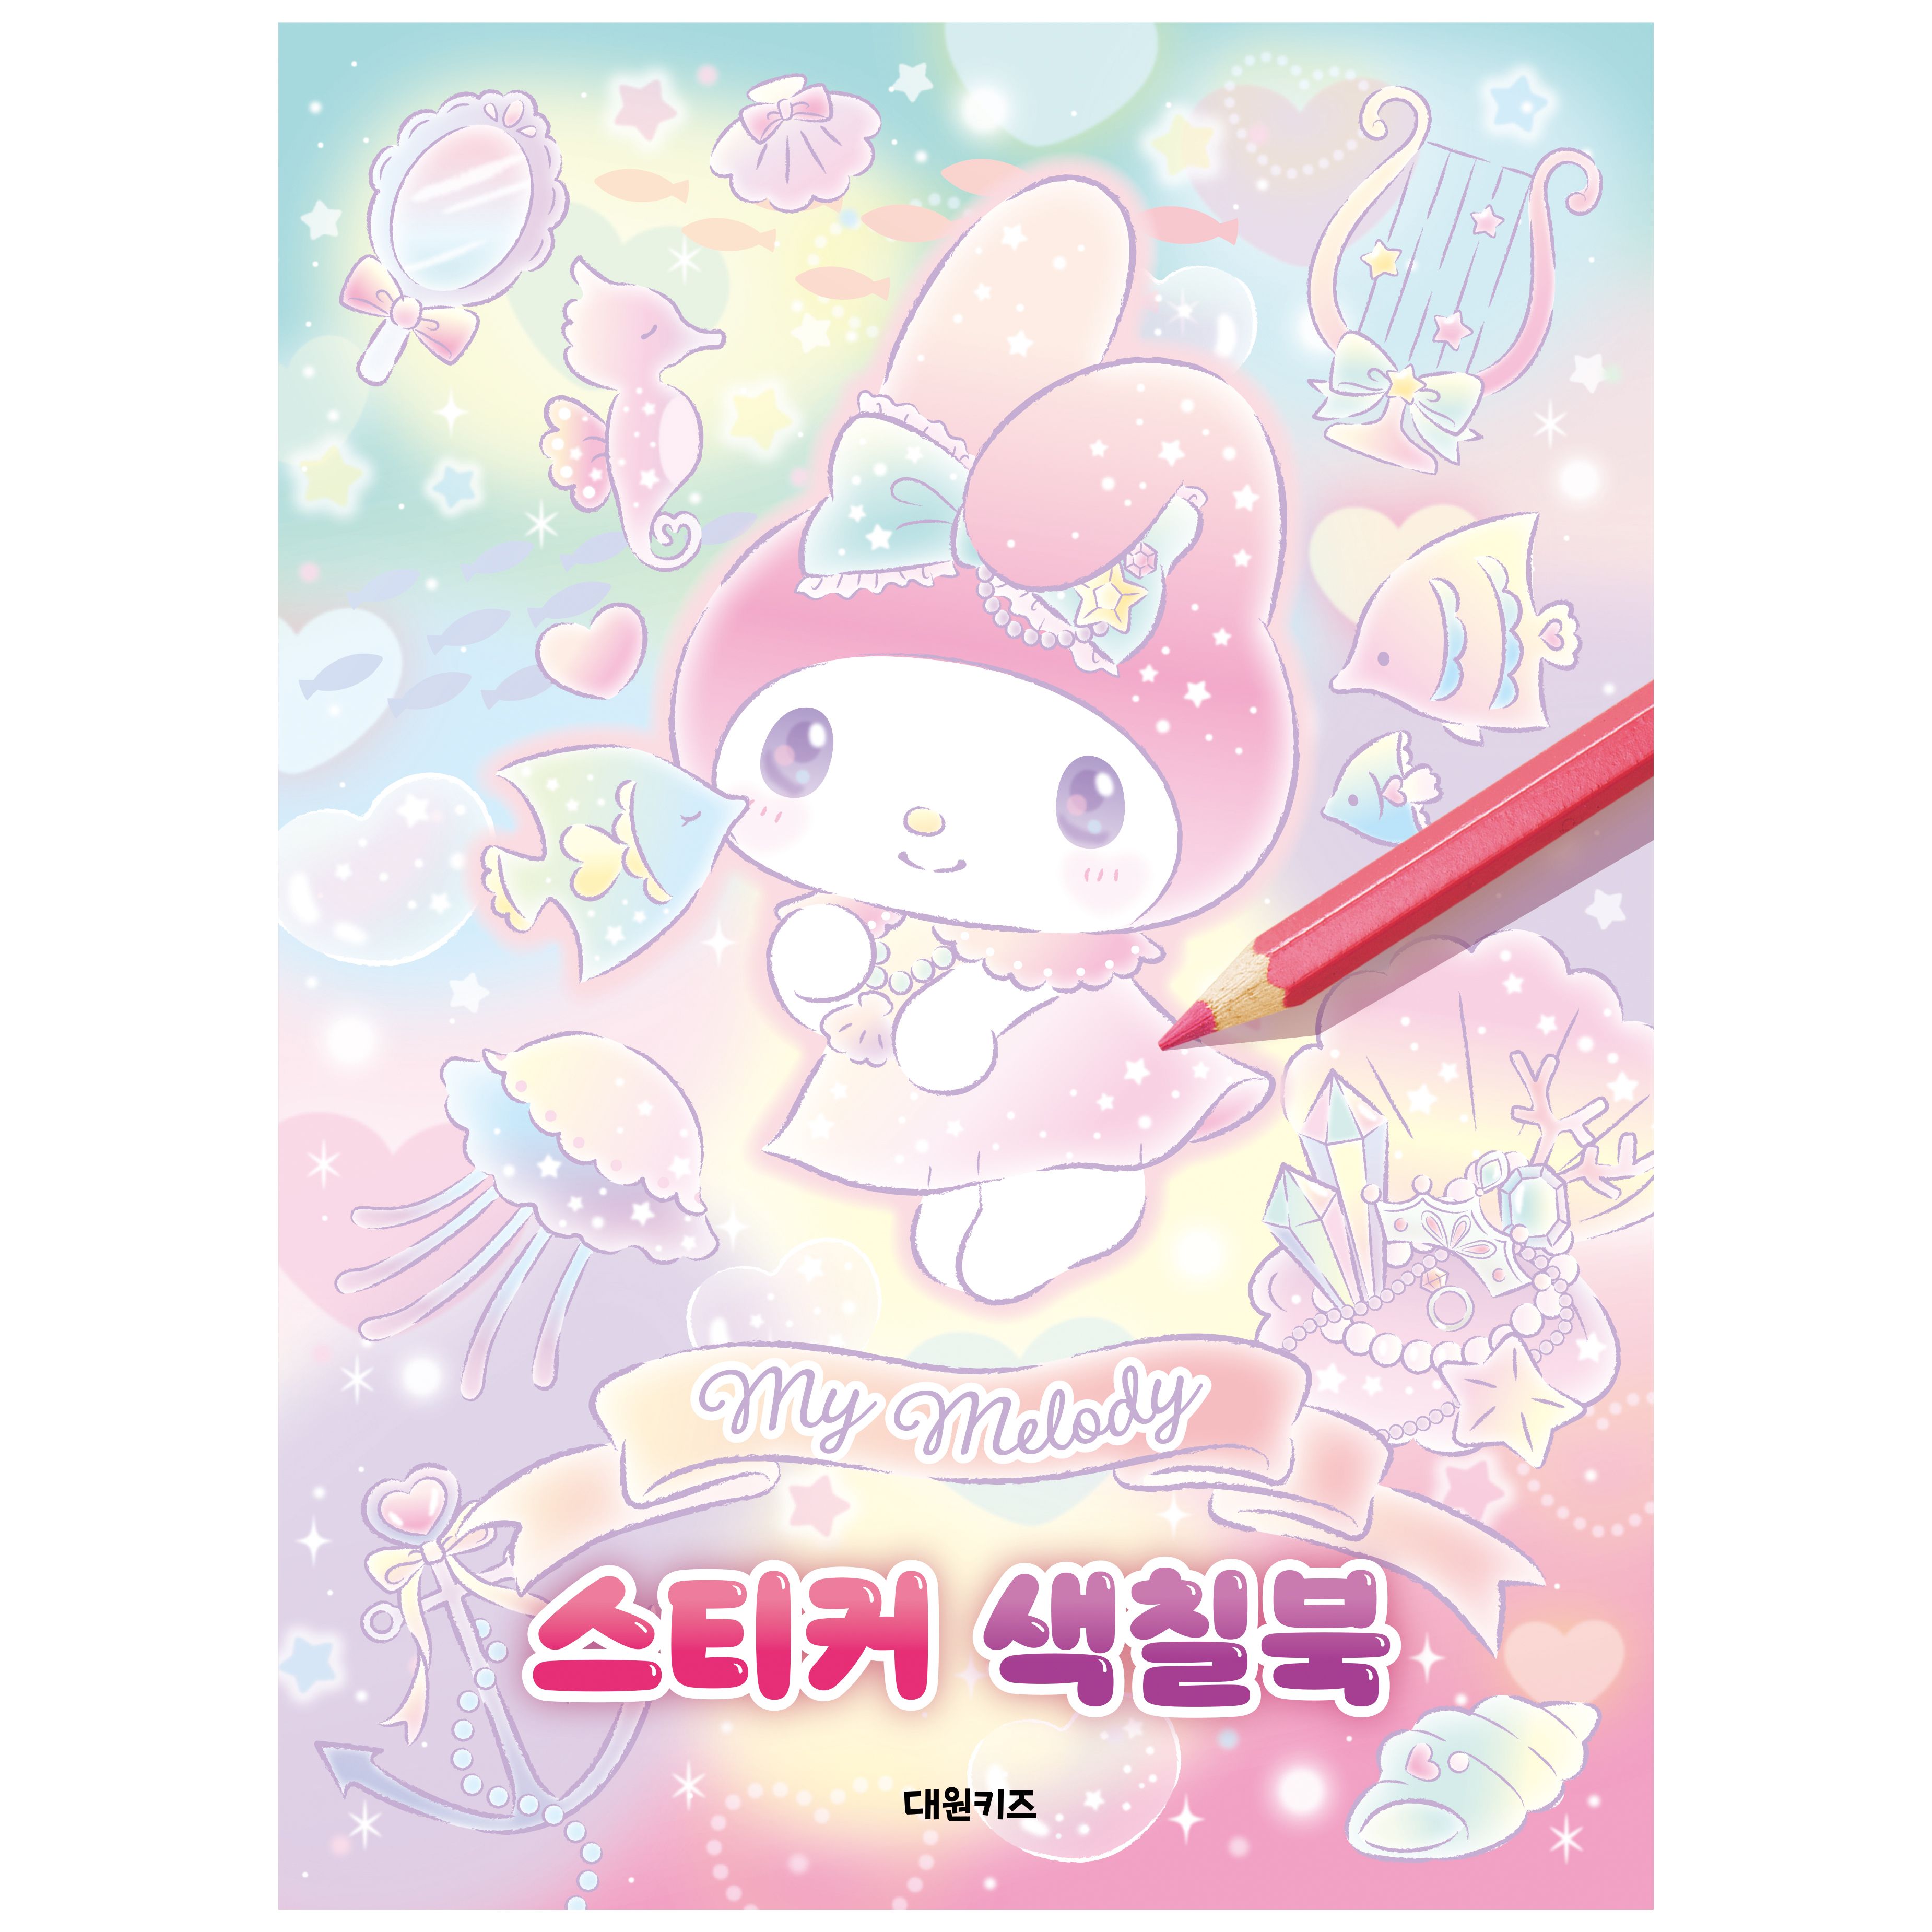 My Melody Sticker Coloring Book